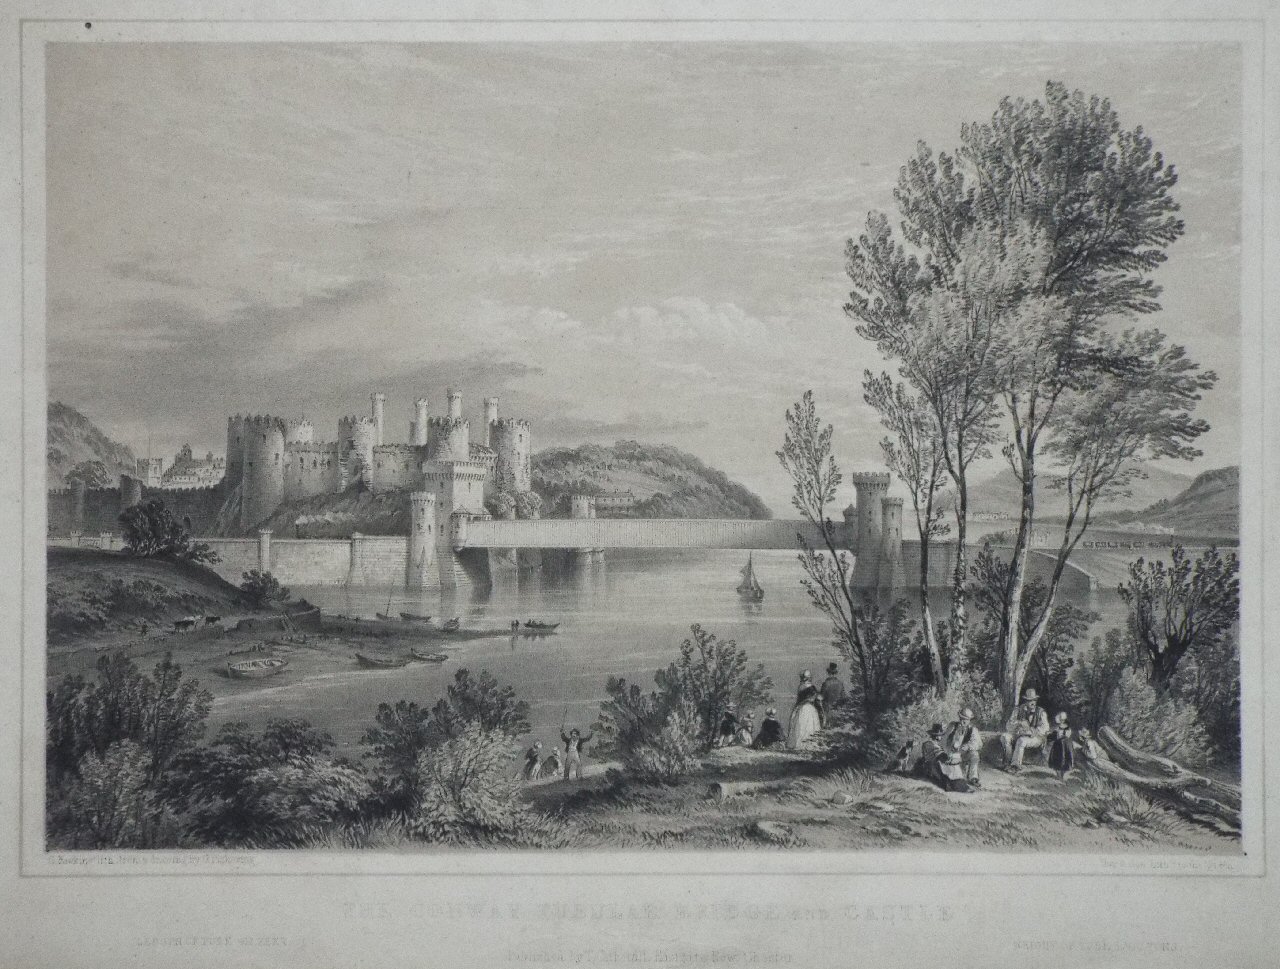 Lithograph - The Conway Tubular Bridge and Castle. - Hawkins